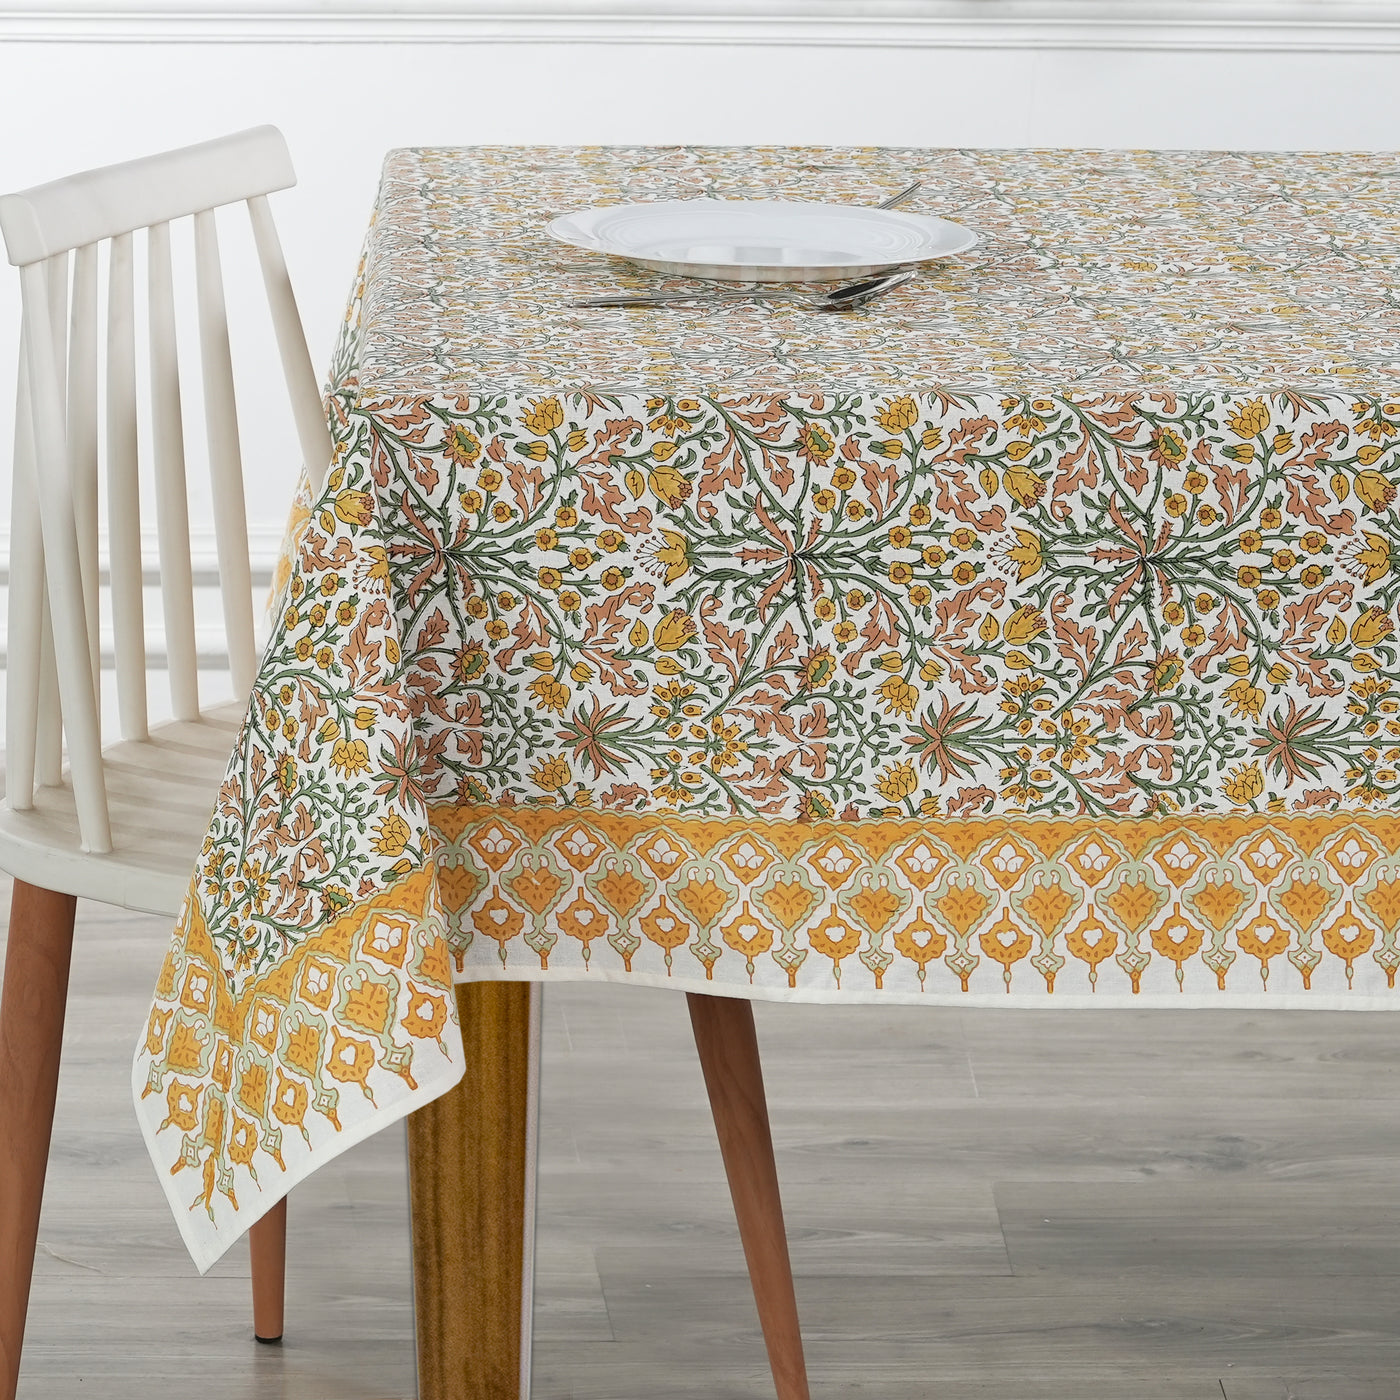 Fabricrush Goldenrod Yellow, Fern Green and Peanut Brown Indian Hand Block Printed 100% Cotton Tablecloth And Table Cover For Farmhouse Wedding Holiday Gifts